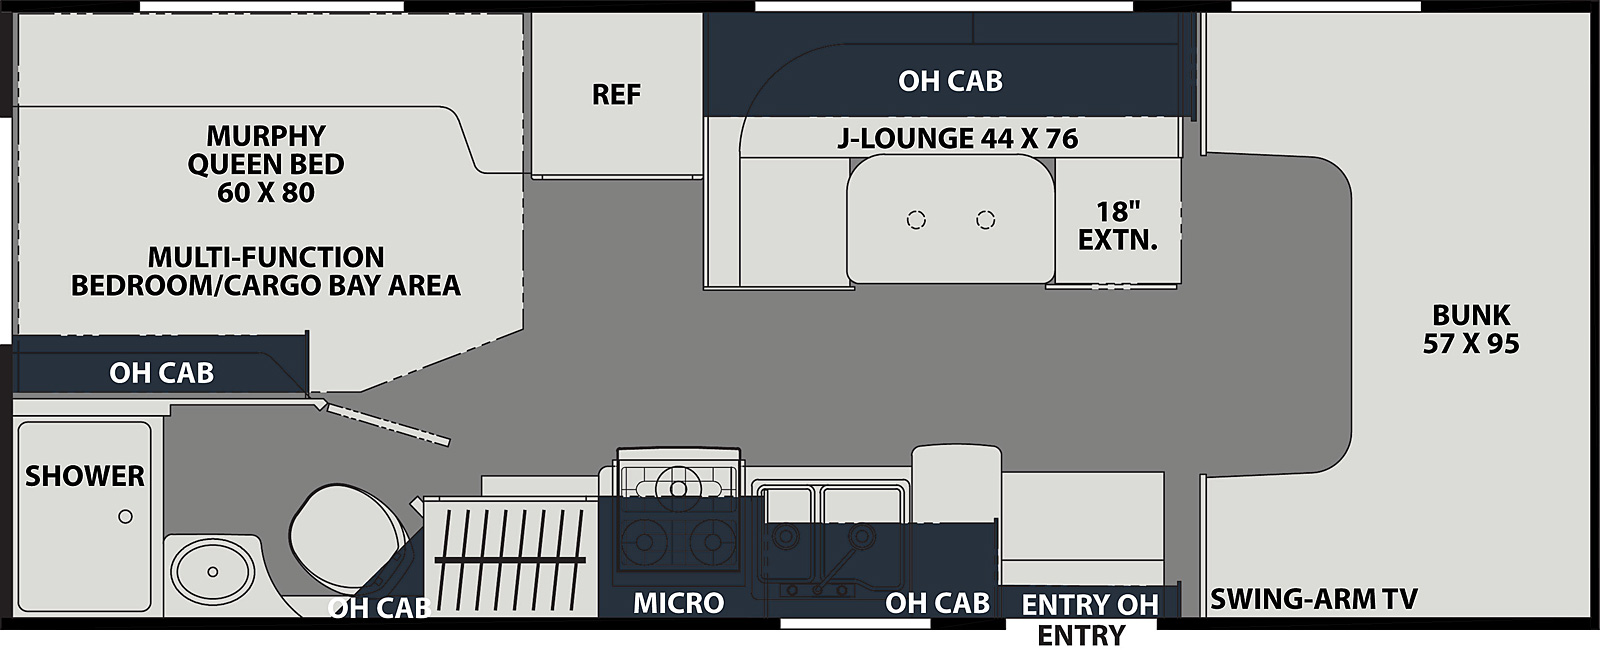 The Leprechaun 220XG FORD 350 has 0 slideouts. Interior layout from front to back; front 57 inch by 95 inch bunk with swing arm TV; door side kitchen with microwave above stovetop, double basin sink and overhead cabinet; off-door side 44 inch by 76 inch J-Lounge with 18 inch extension and overhead cabinets and refrigerator; rear off-door side 60 inch by 80 inch murphy queen bed in multi-function bedroom/cargo bay area; rear door side bathroom with shower, toilet and sink with overhead cabinets.